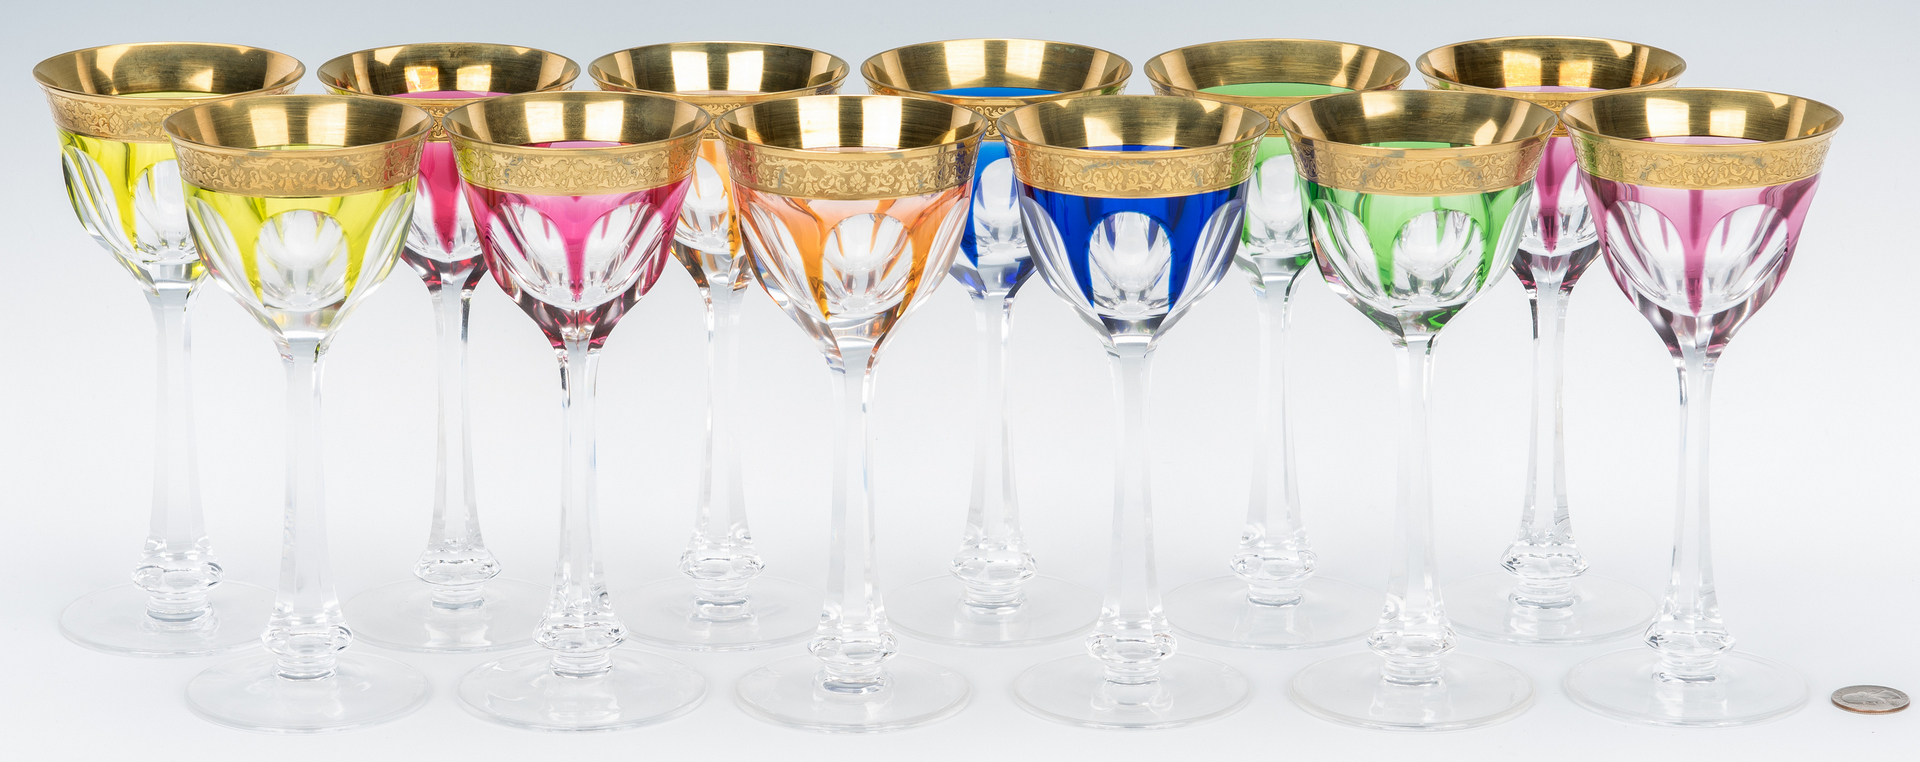 Lot 864: 12 Signed Moser Colored Wine Glasses